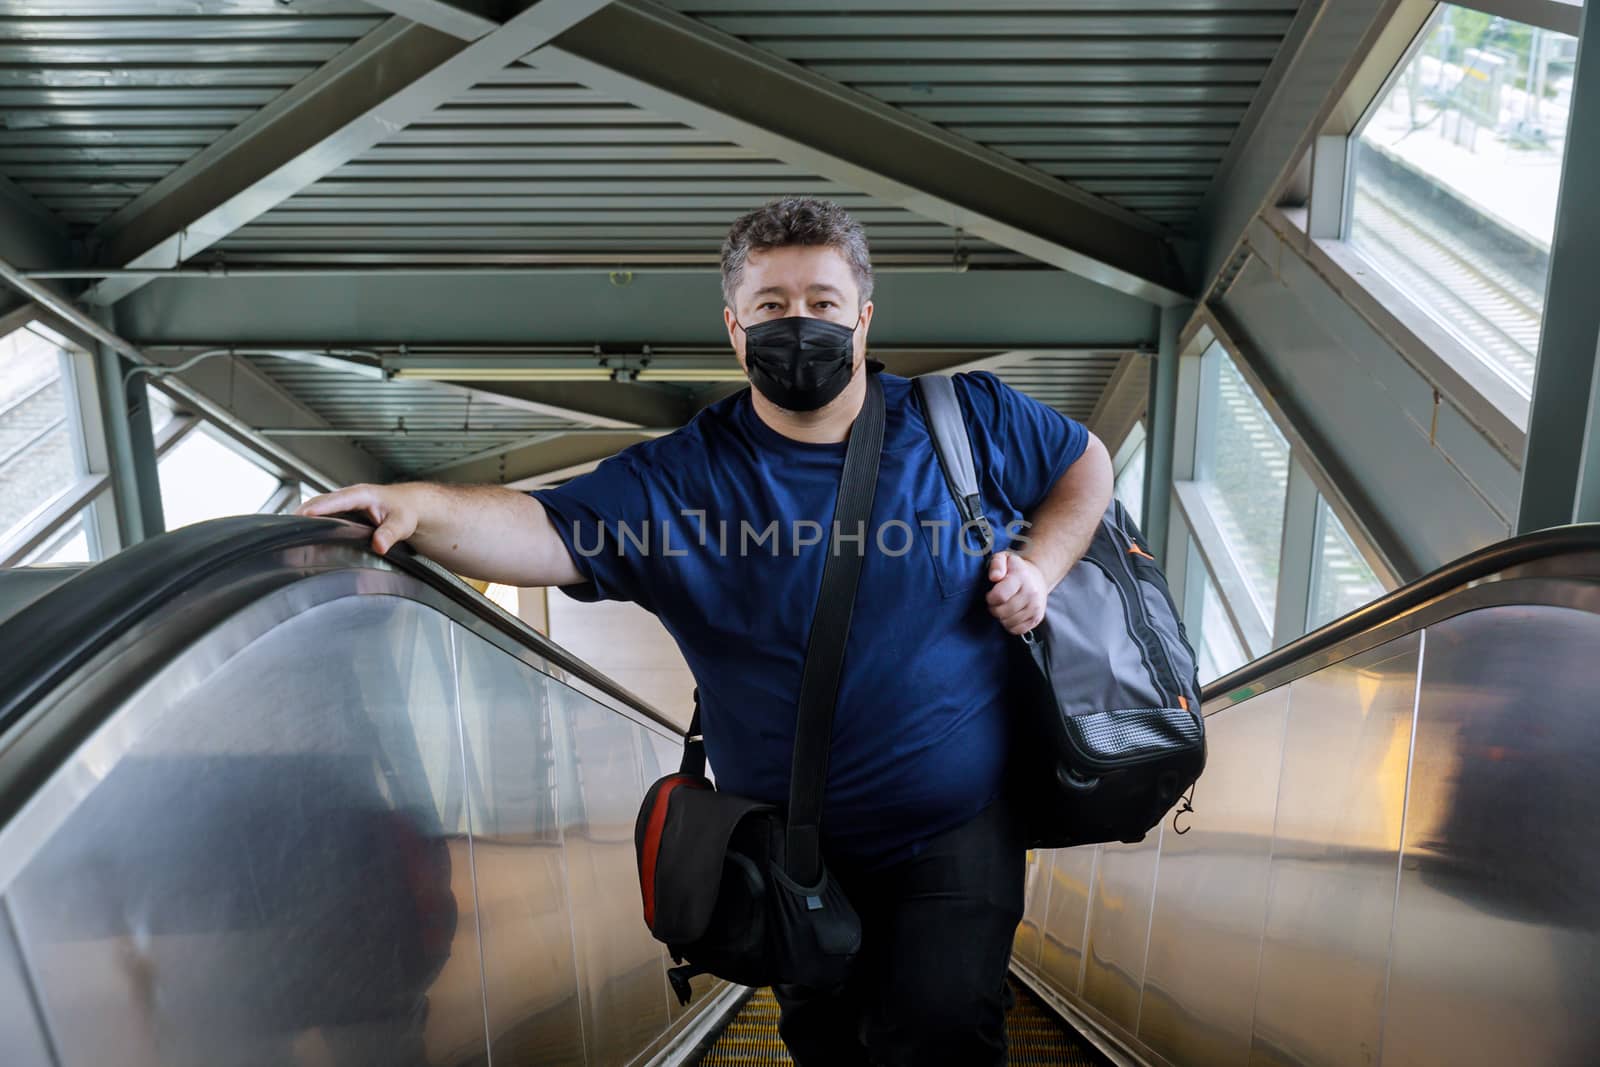 Man wear surgical face mask for protecting coronavirus, stand on the escalator, travel to the train, for trip during pandemic COVID-19